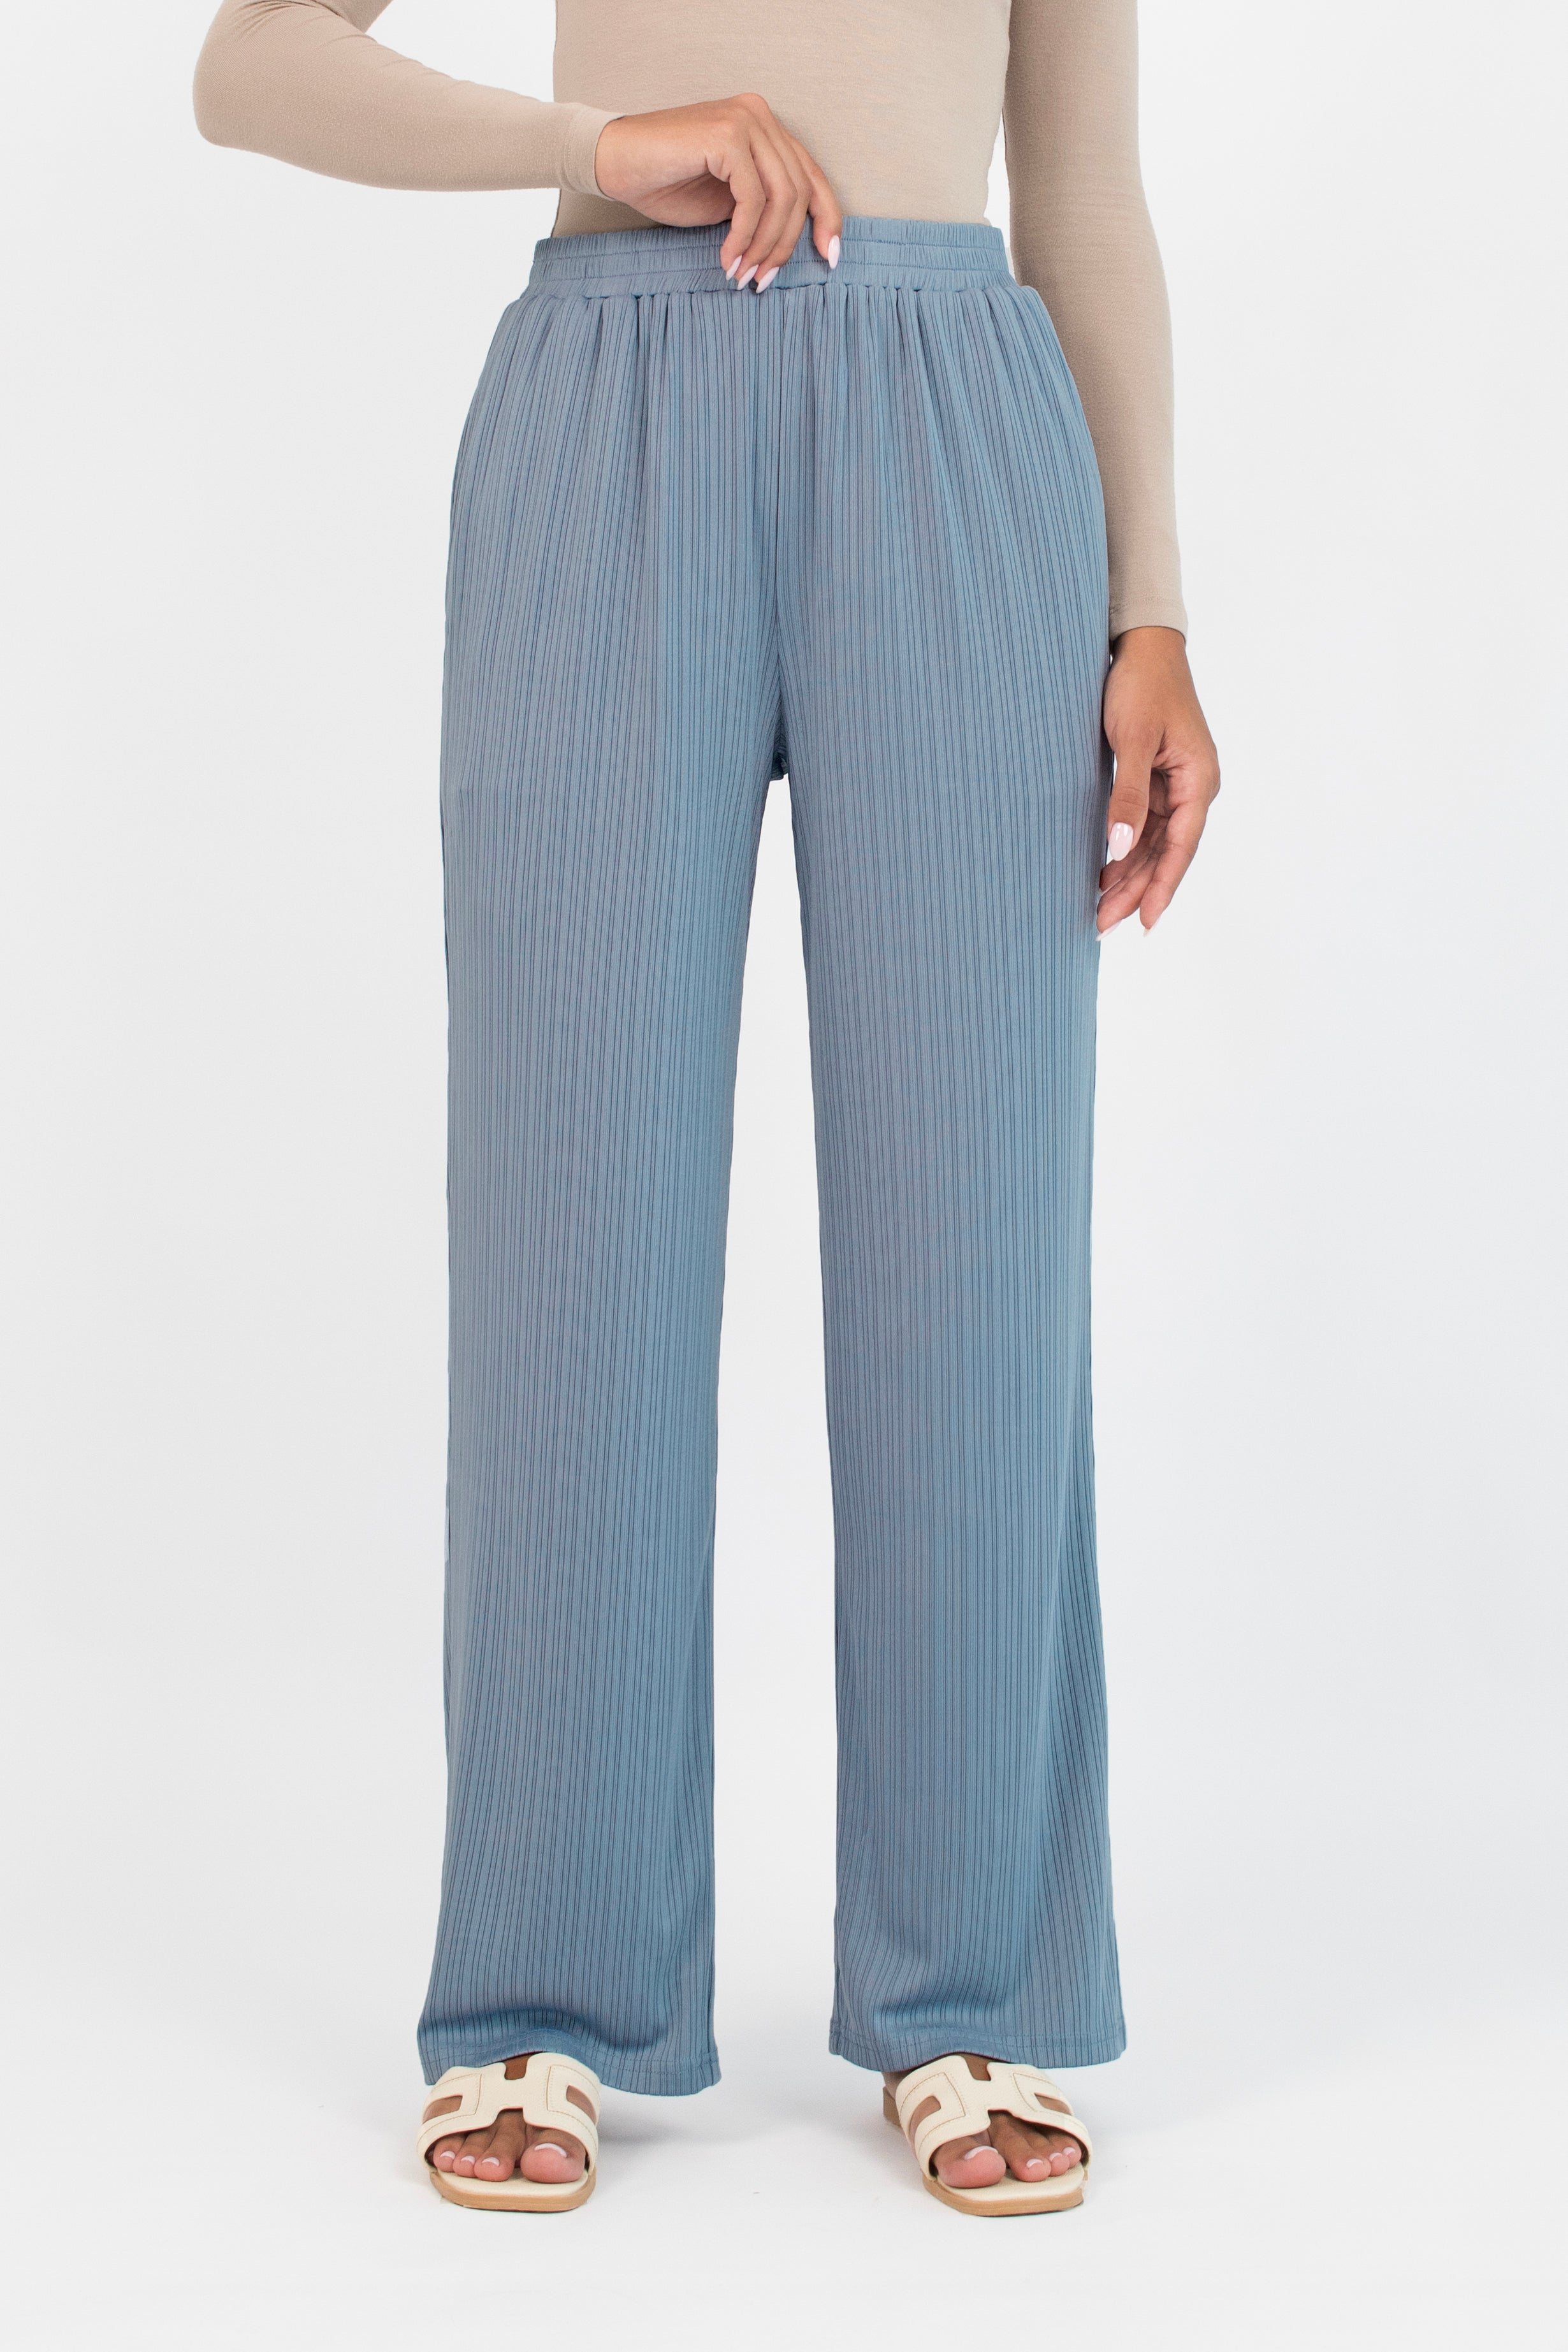 CA - Ribbed Relaxed Fit Pants - Blueprint